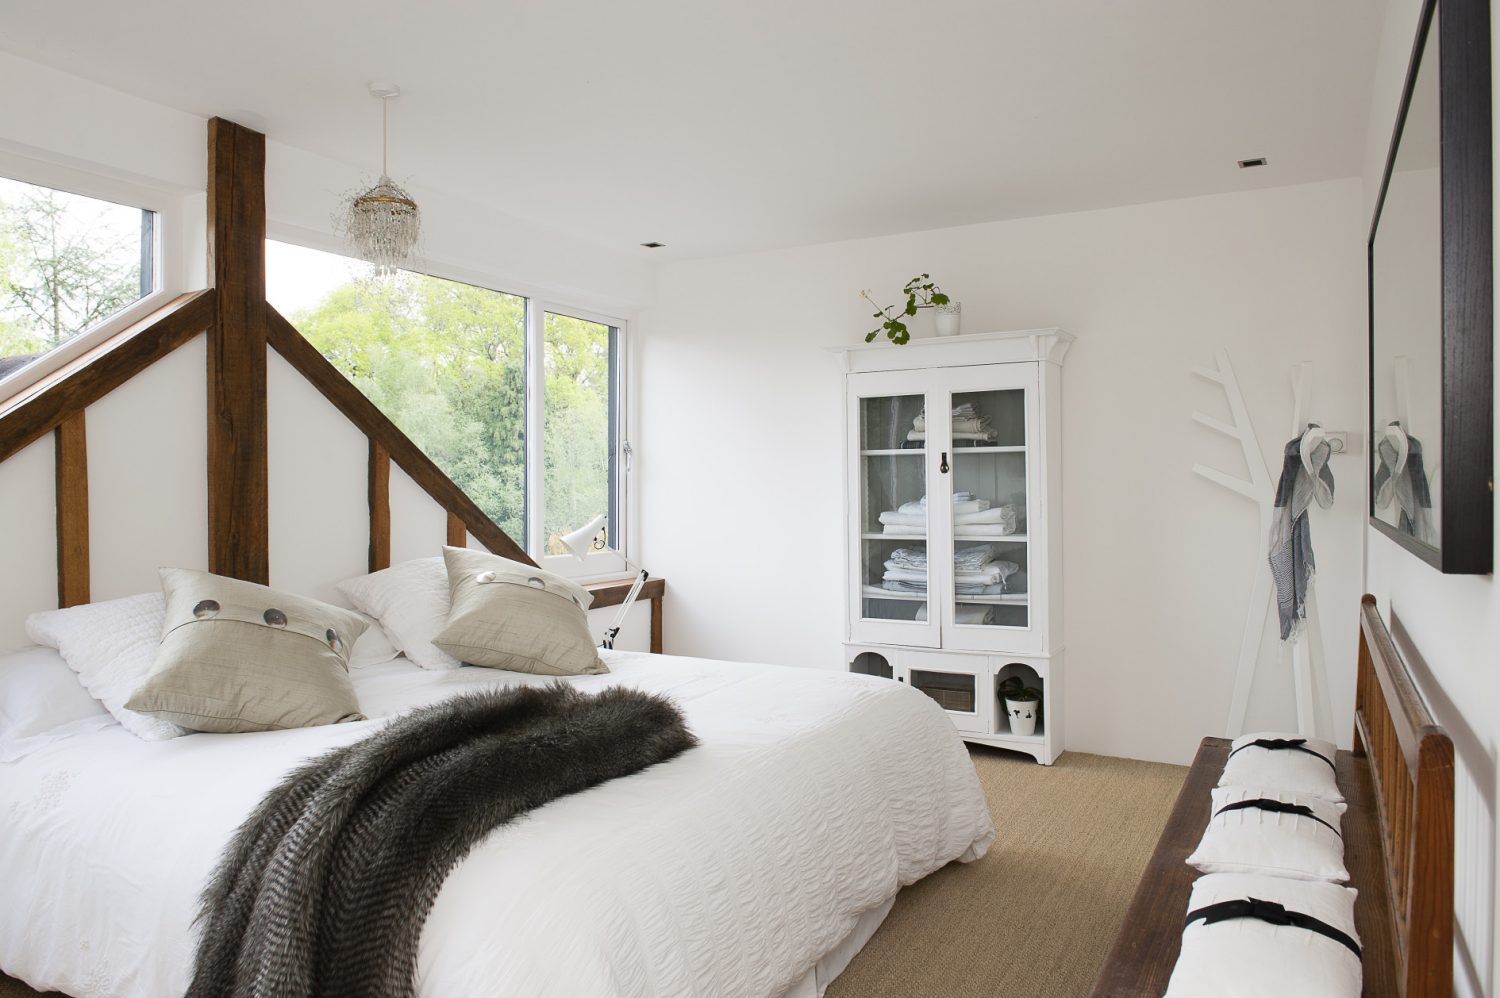 The large window overlooking the treetops is also the headboard for the double bed in one of the guest bedrooms. Sue has cleverly mirrored the view on the opposite wall so one can lie in bed still looking out over the surrounding greenery